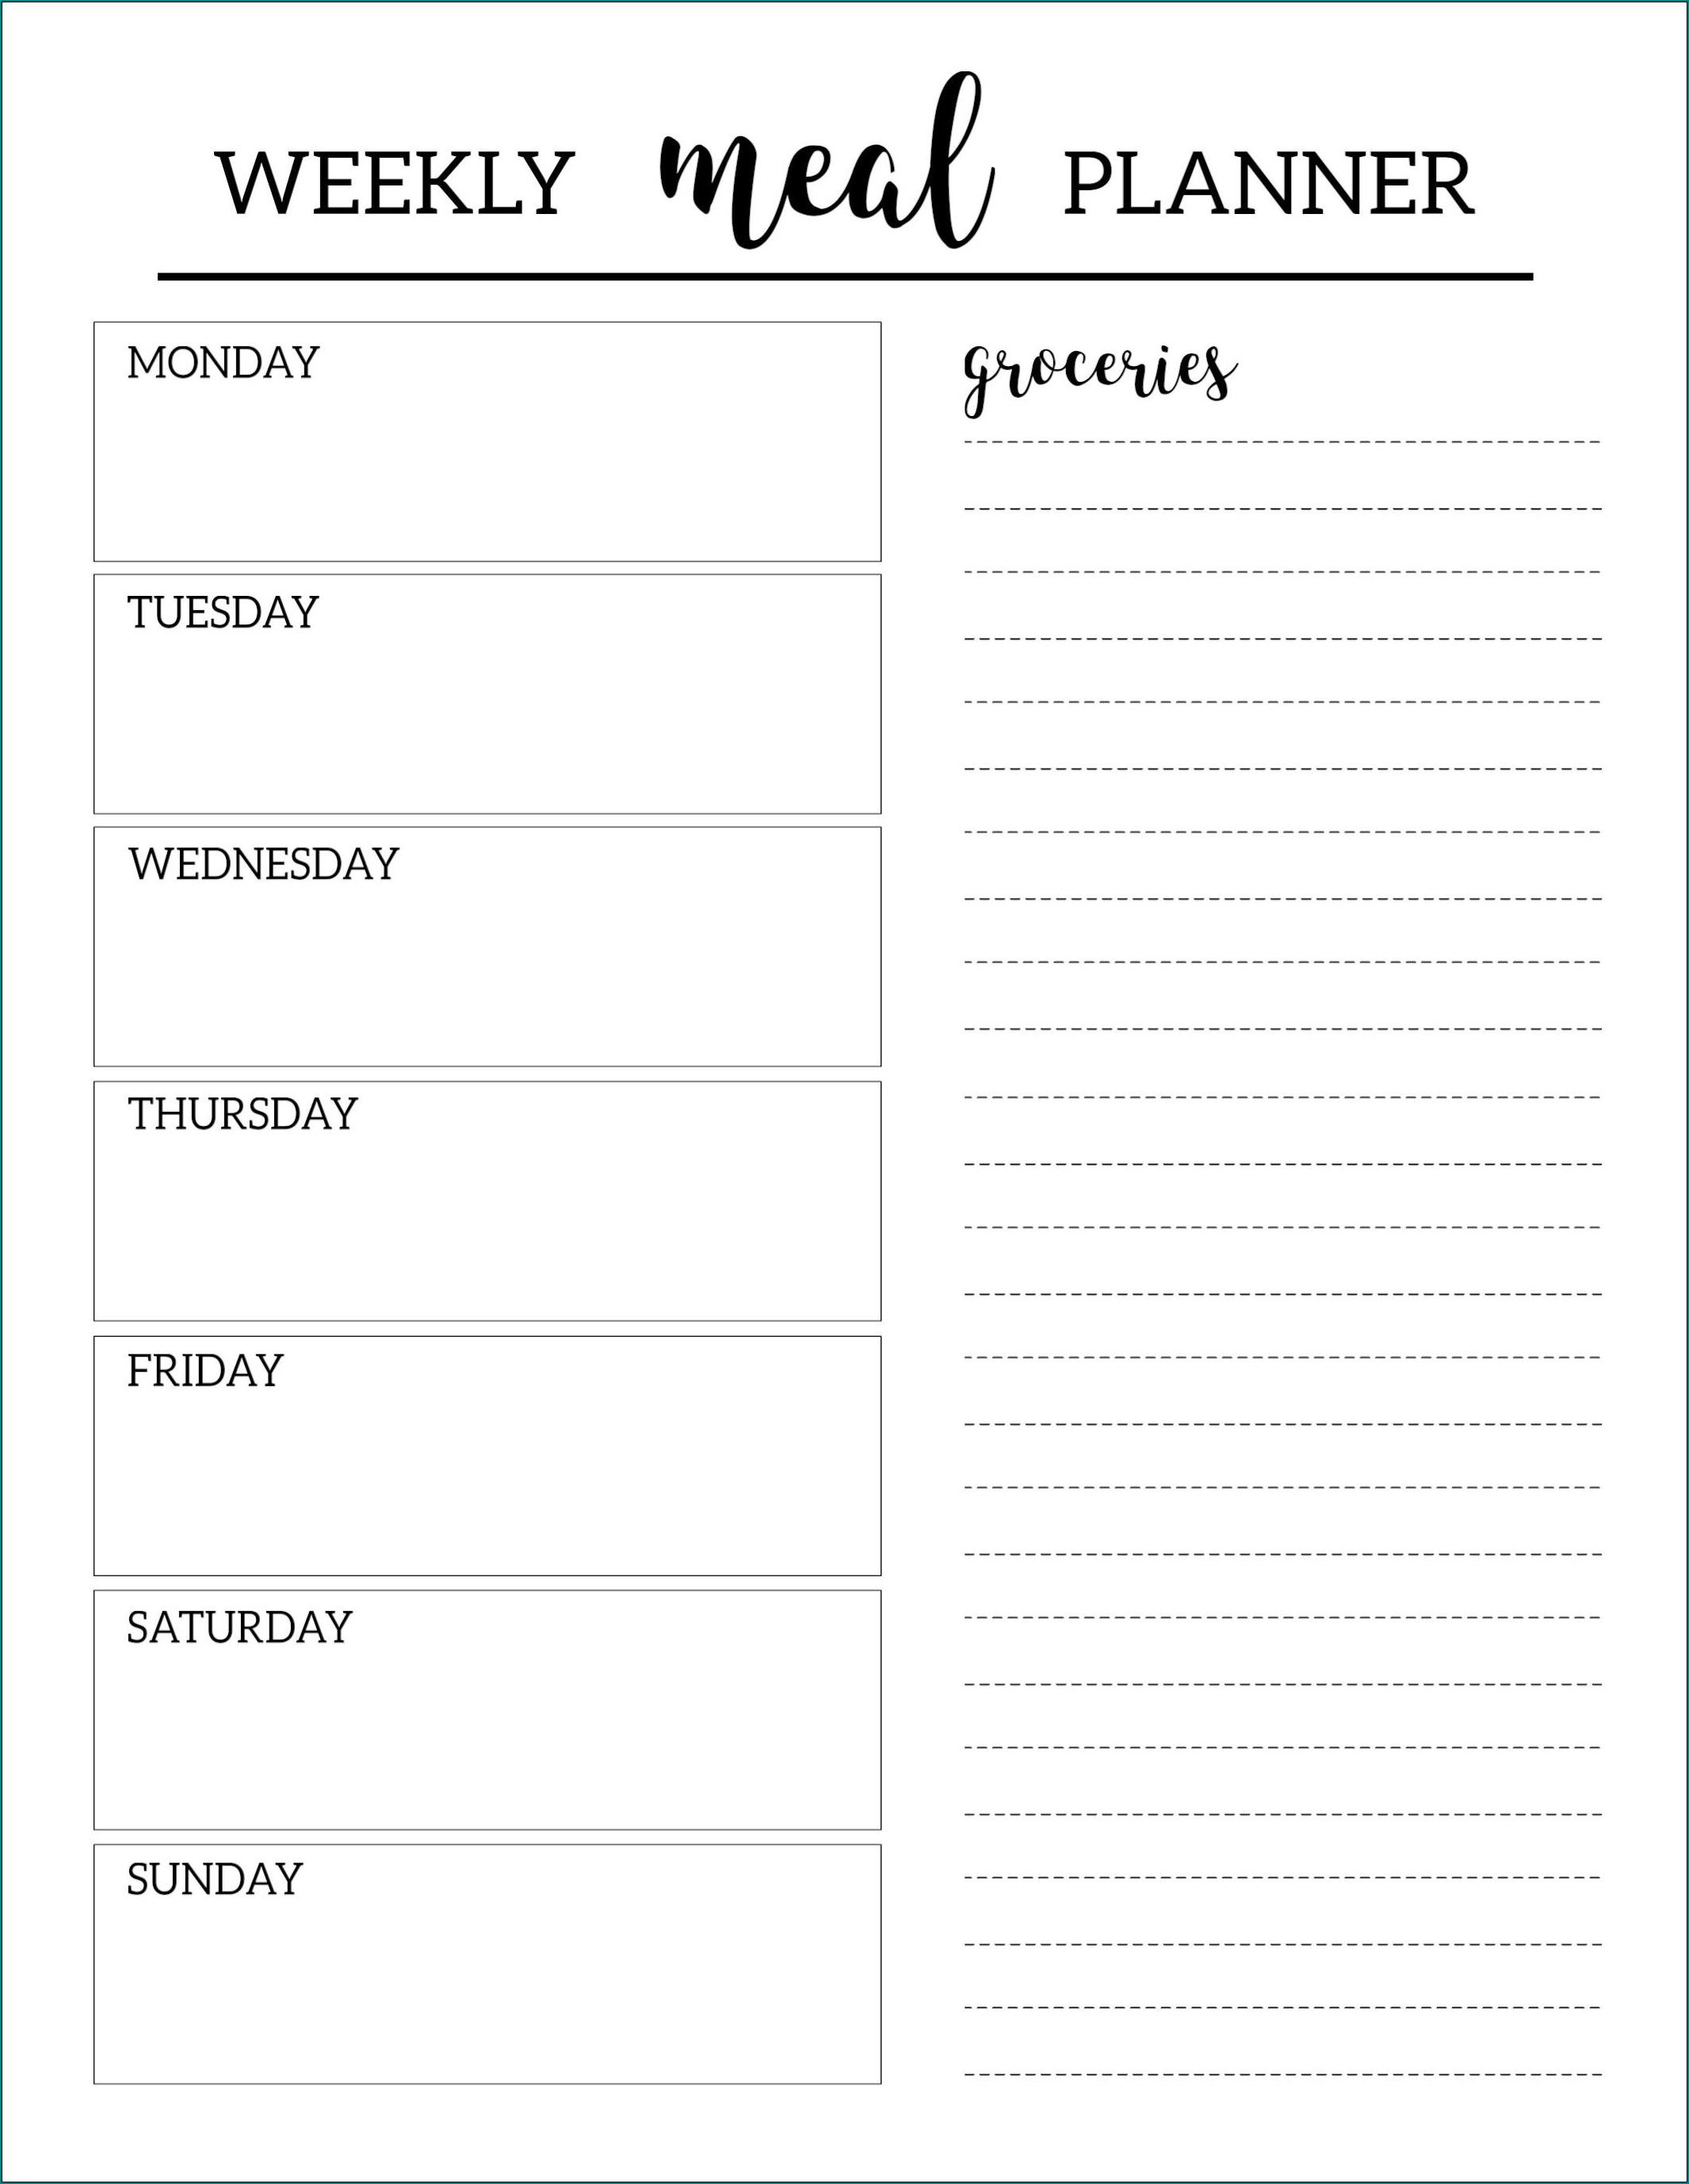 Example of Weekly Meal Planner Template